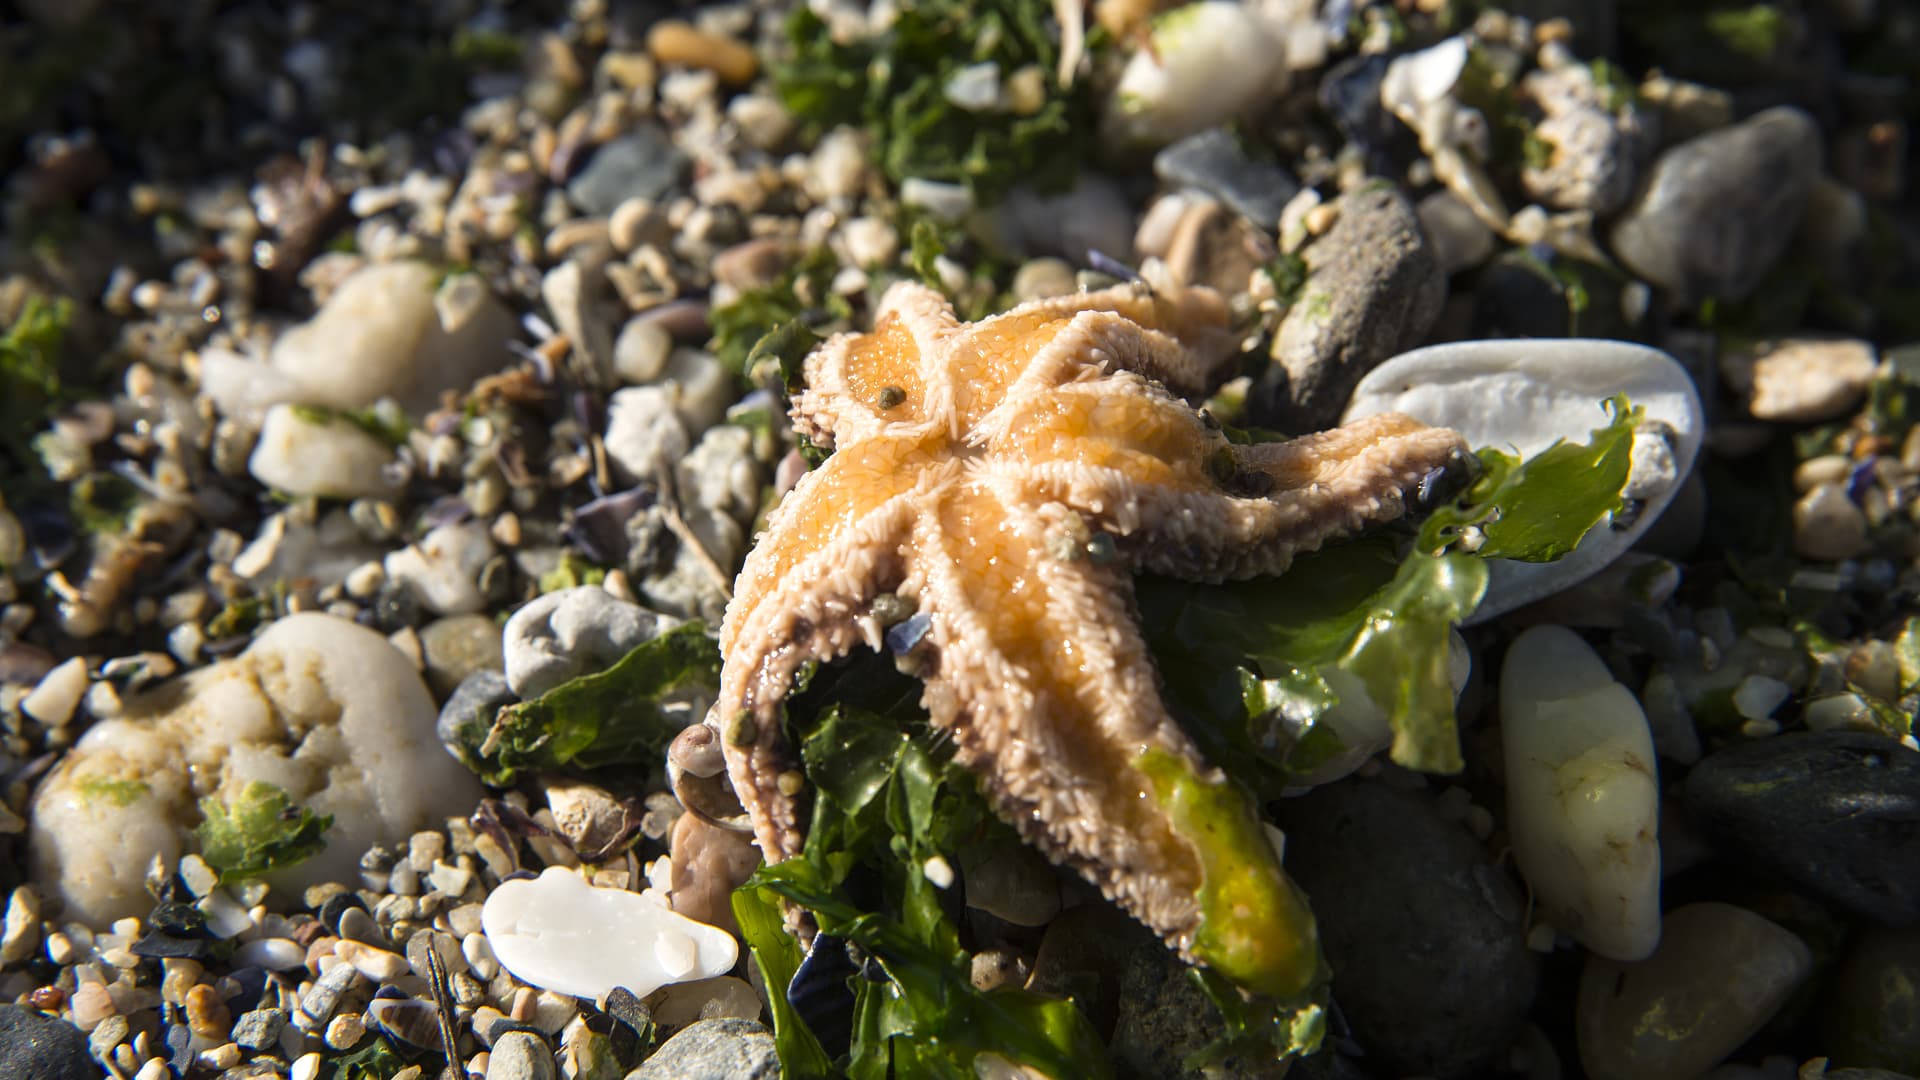 Bacteria and excessive fertilization turn the starfish into a sticky substance